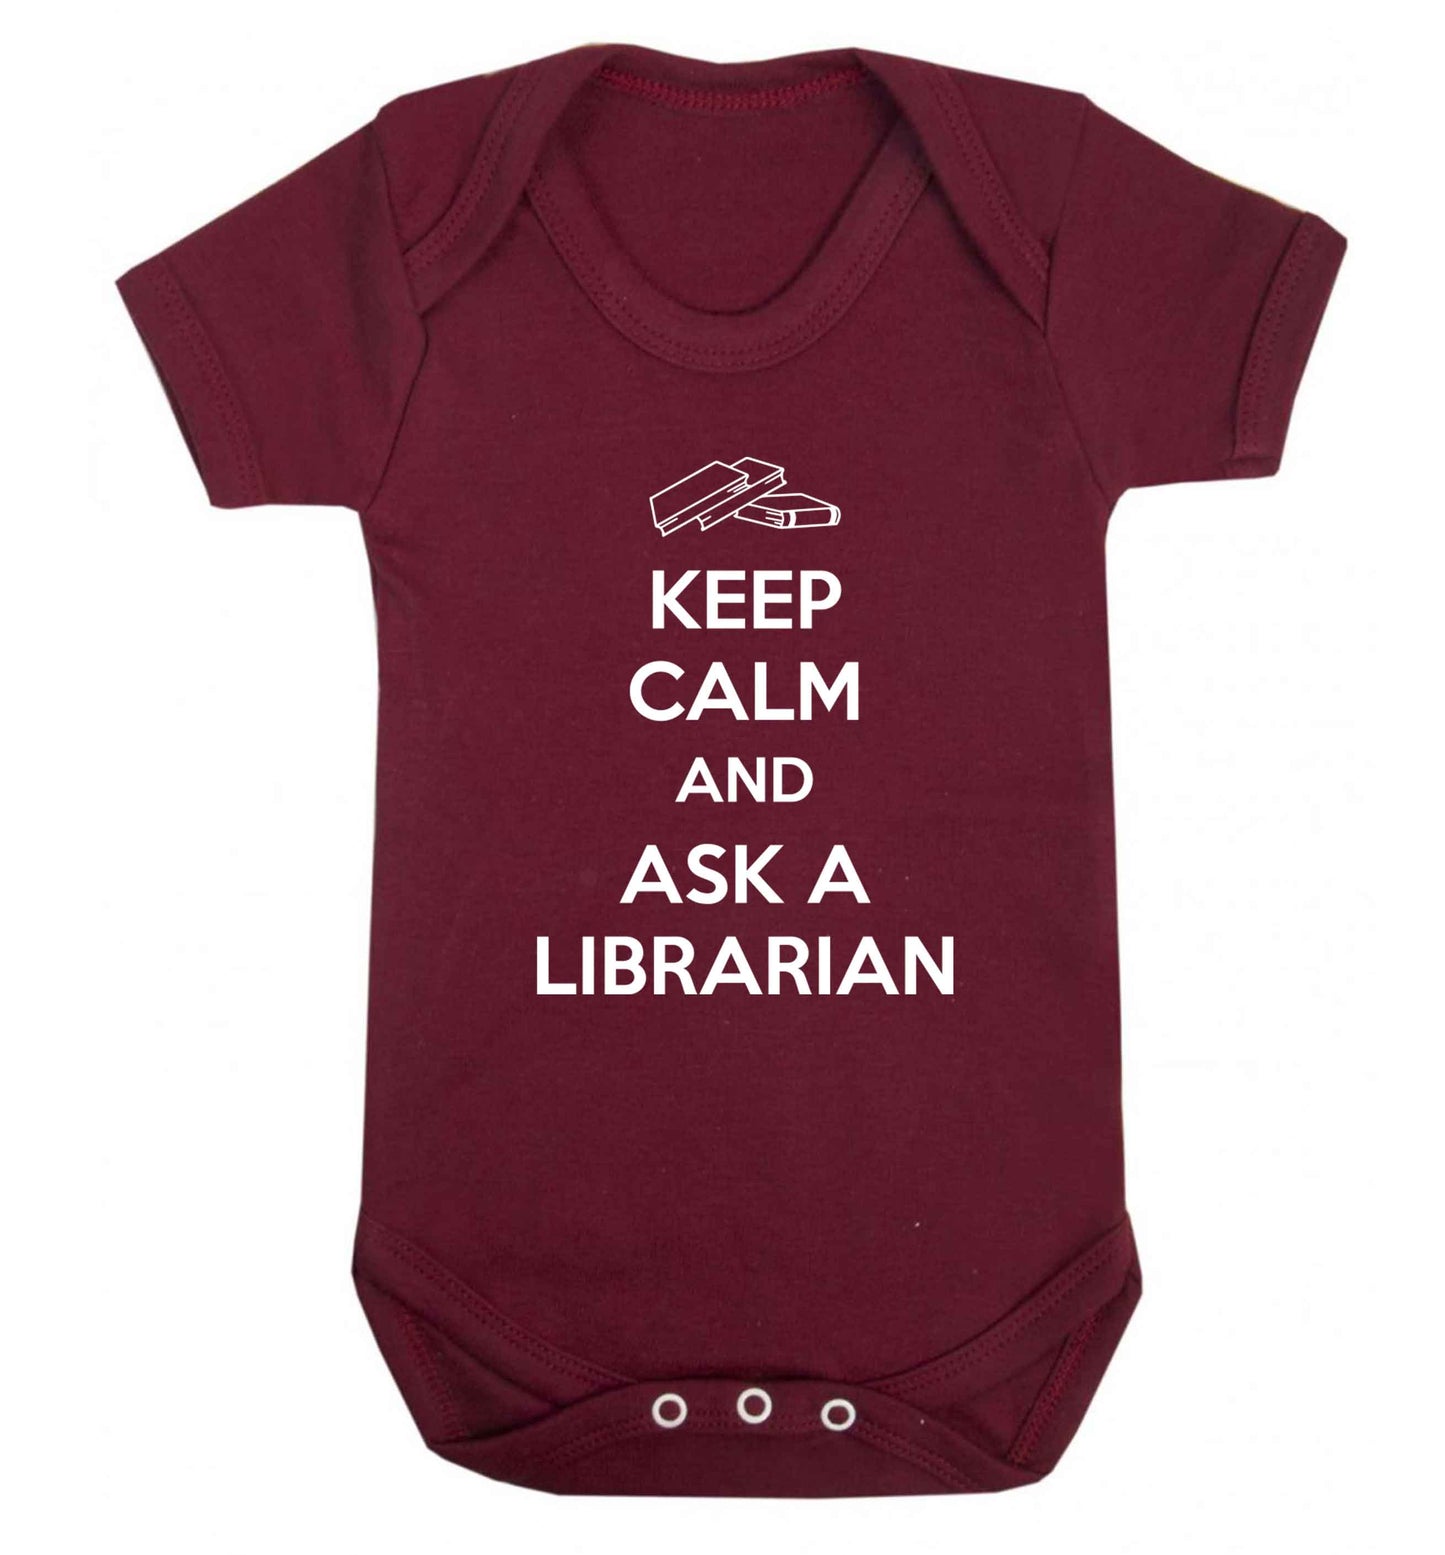 Keep calm and ask a librarian Baby Vest maroon 18-24 months